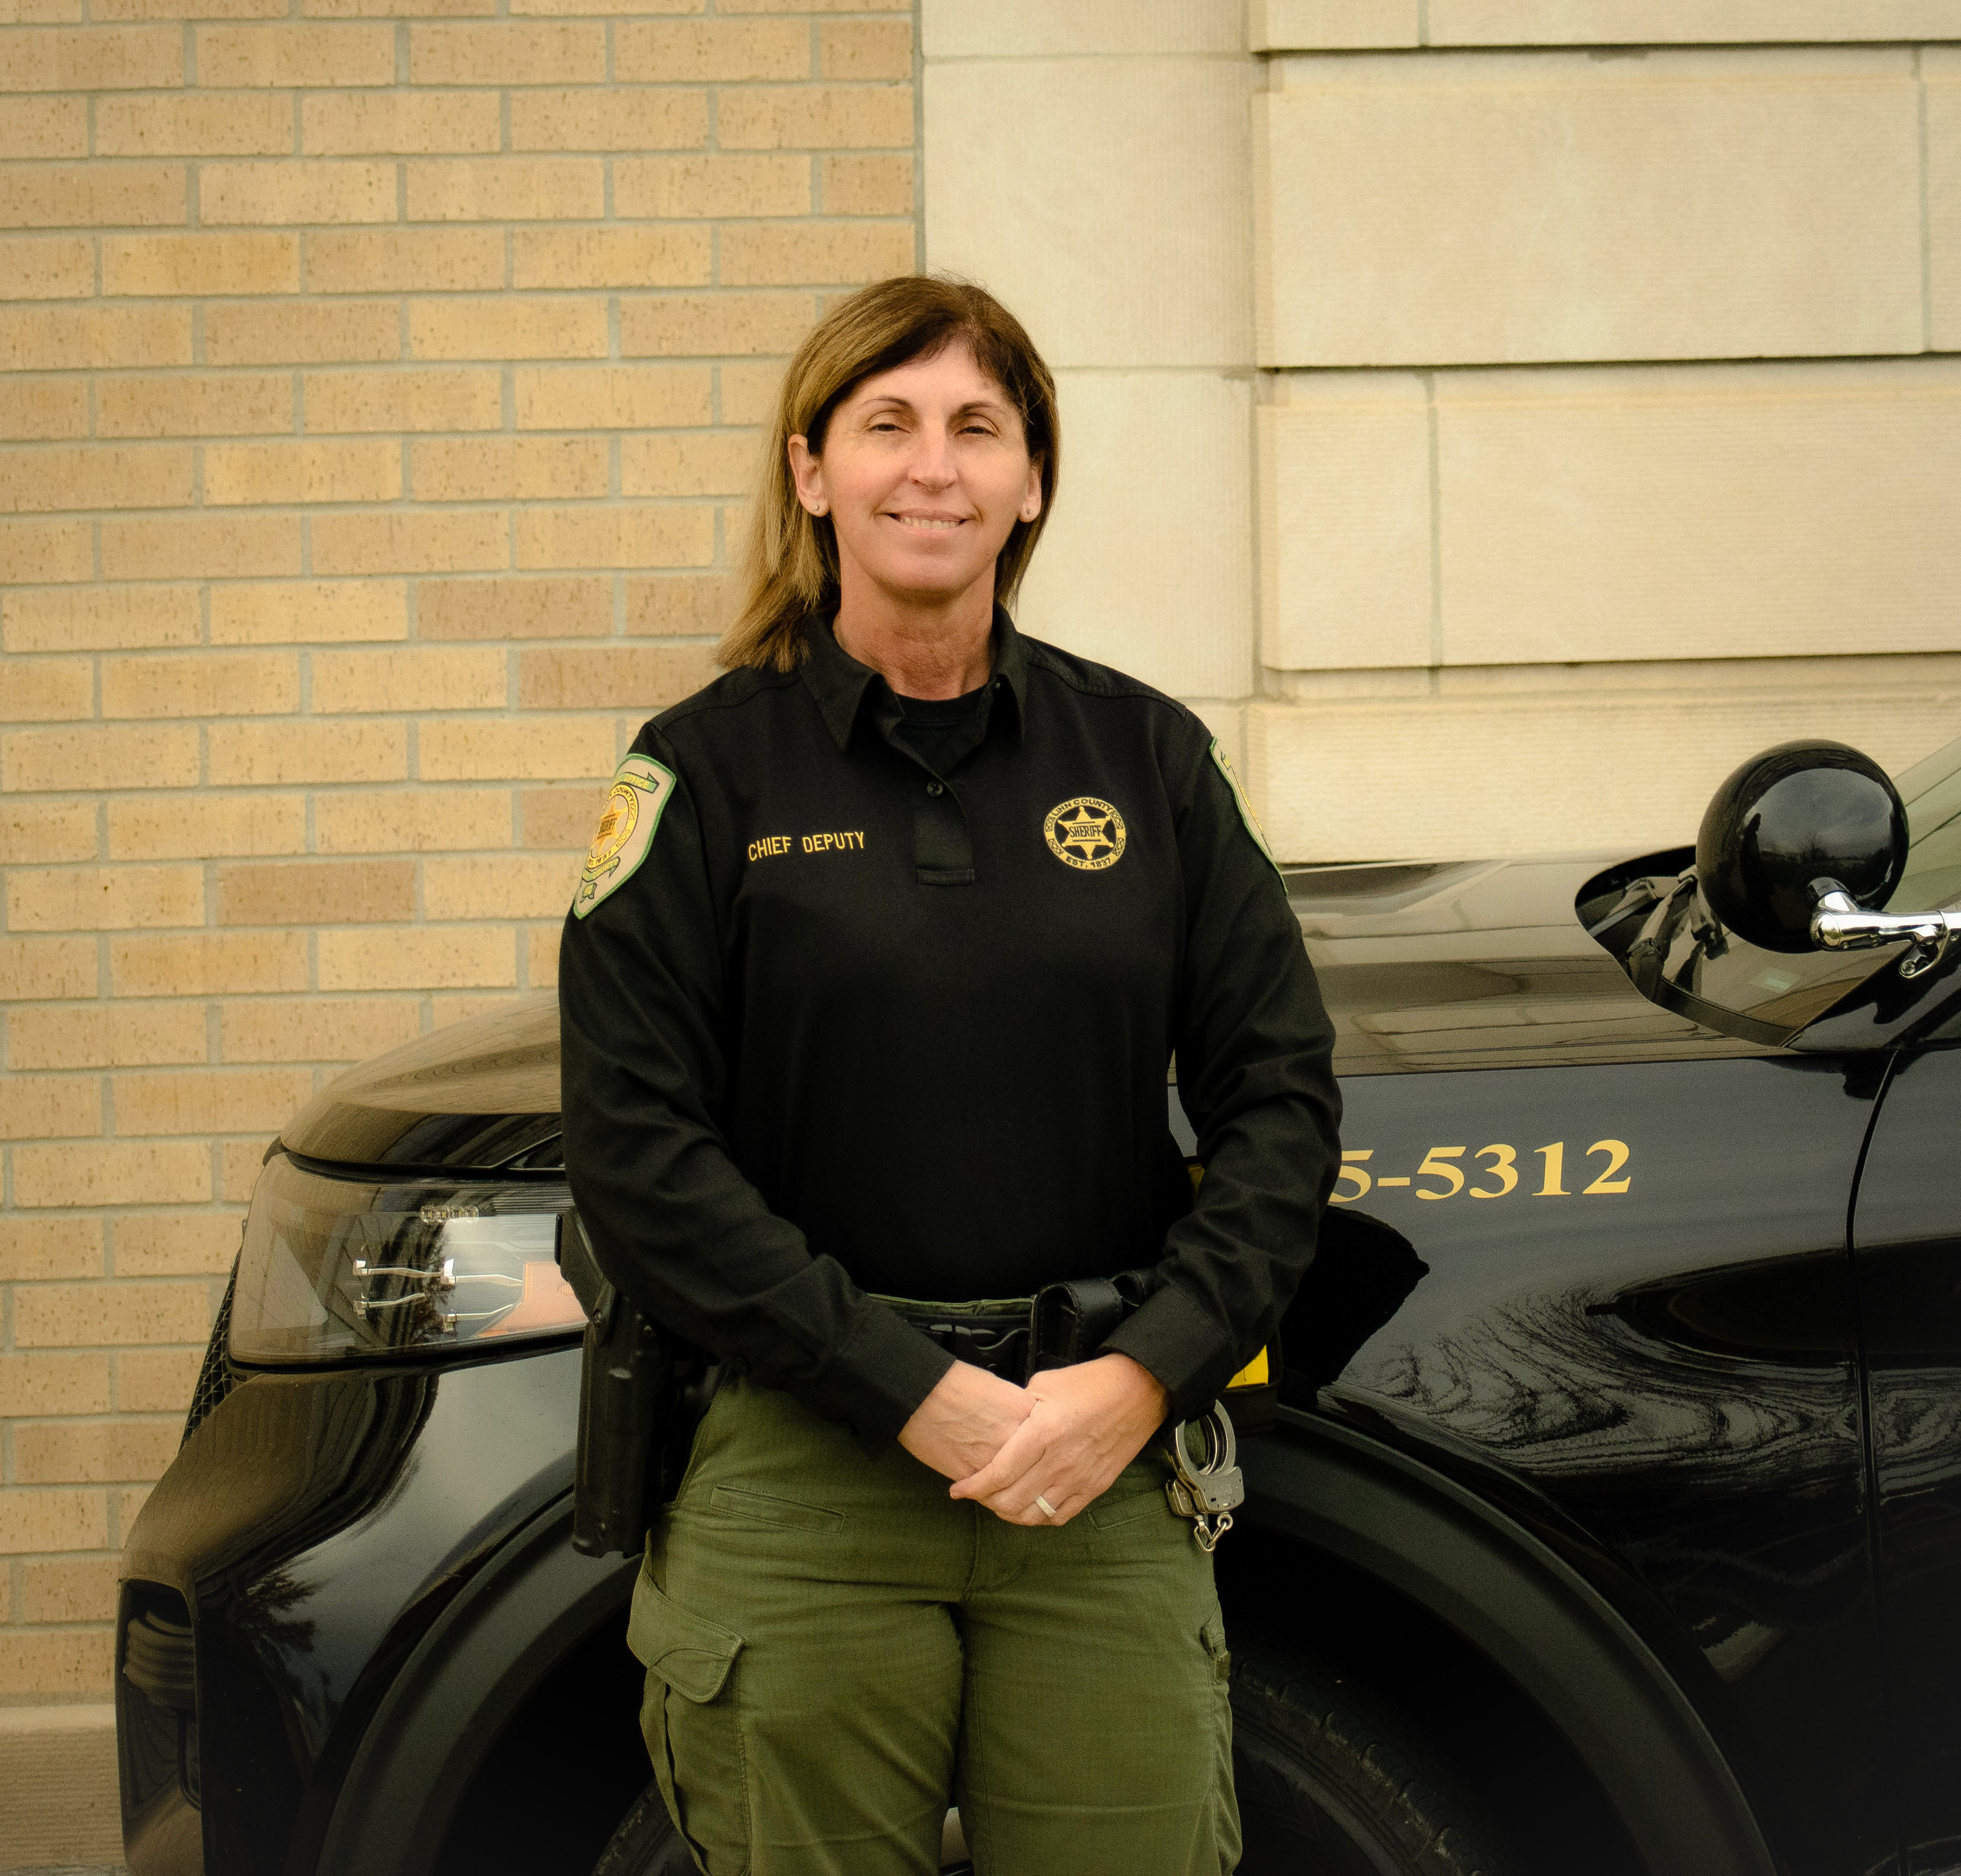 Chief Deputy Carrie Pfeifer standing in front of her patrol vehicle. 